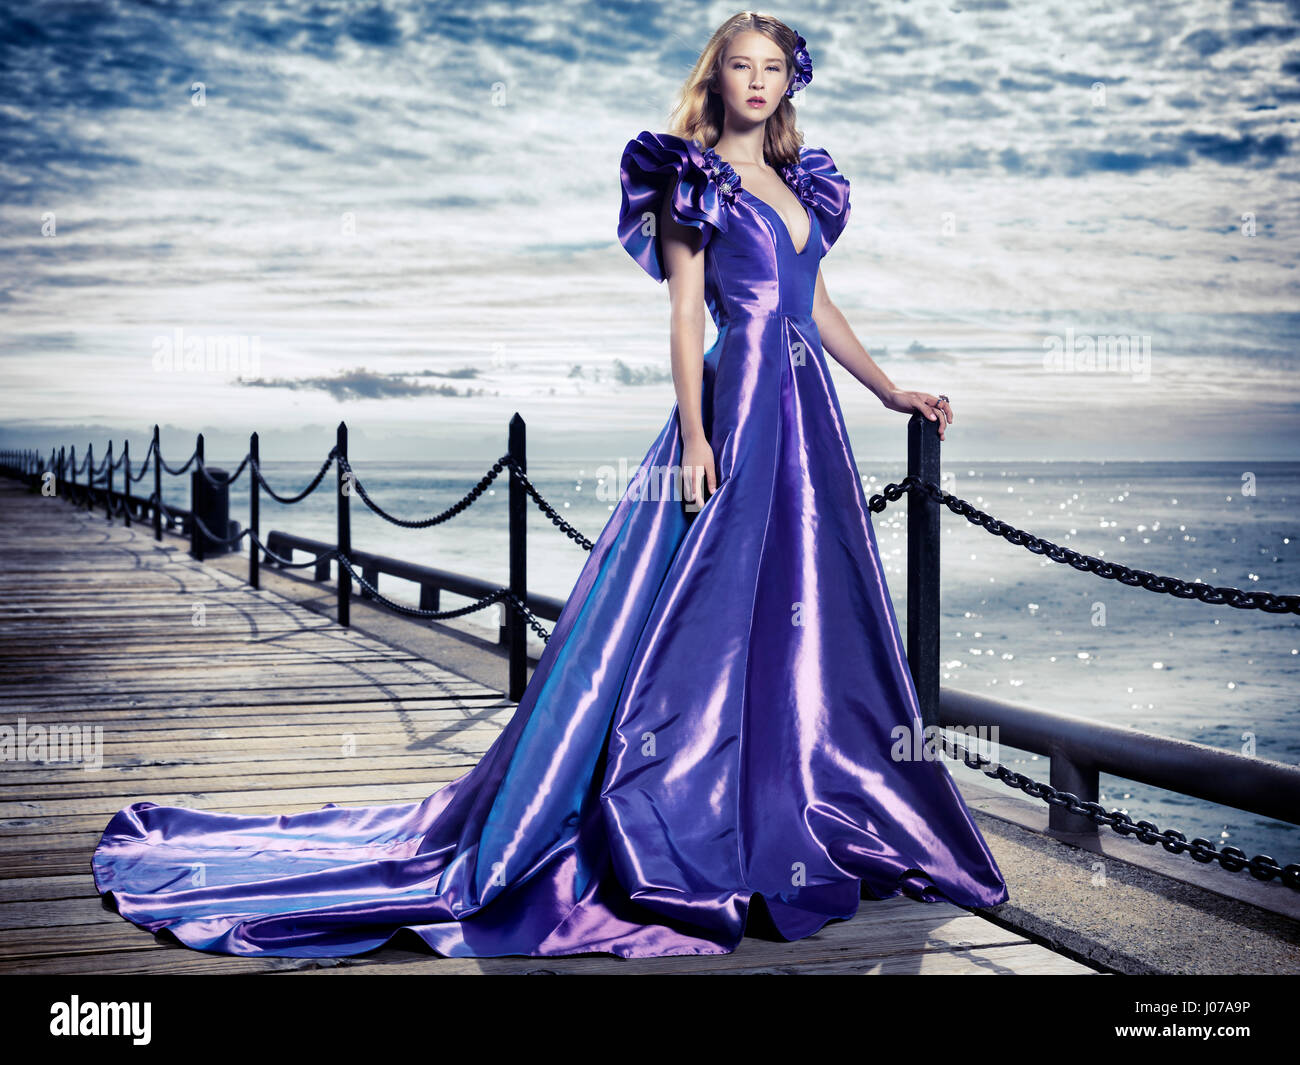 Young woman wearing a beautiful long blue evening gown standing at waterfront, artistic fashion portrait Stock Photo